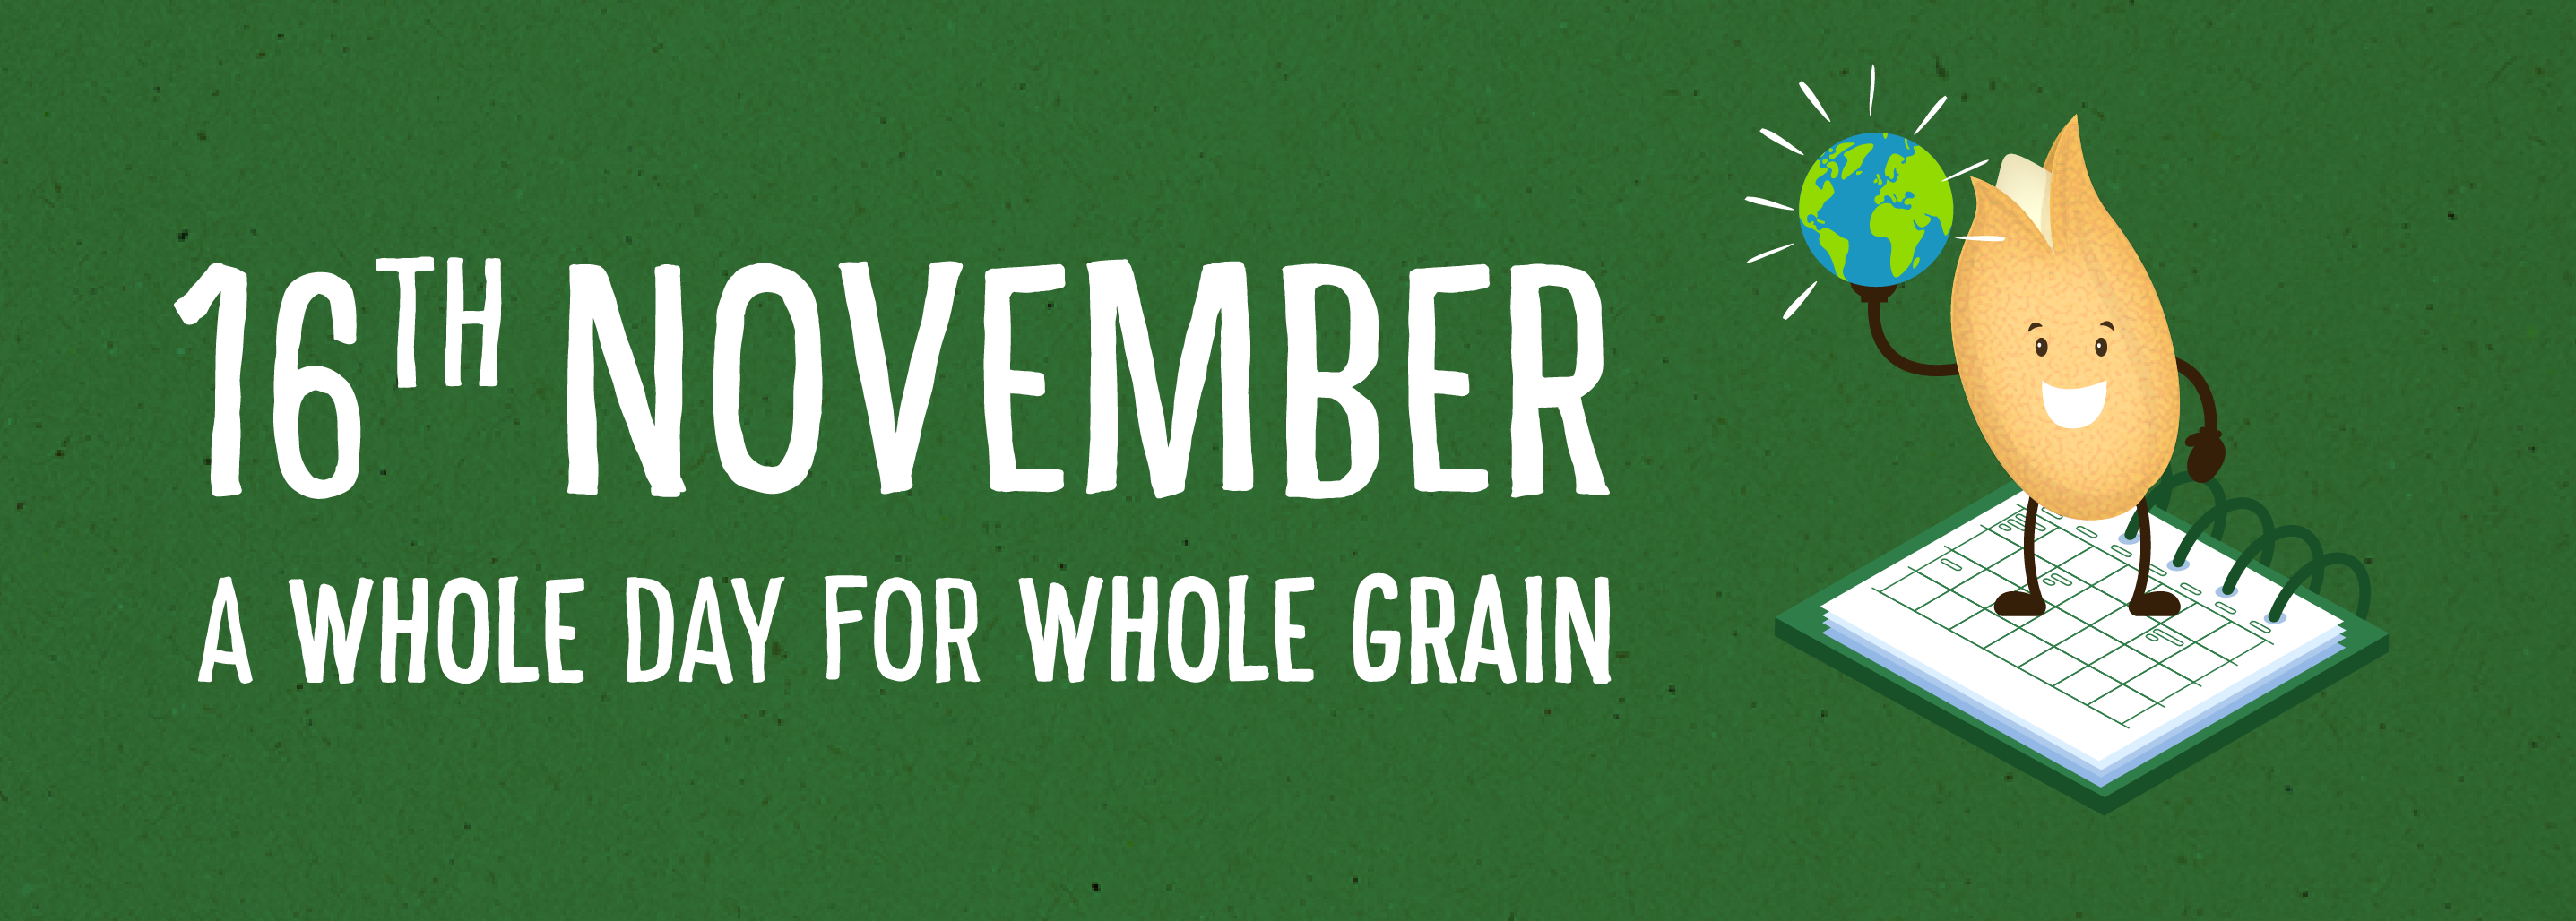 16th November A whole day for whole grain 